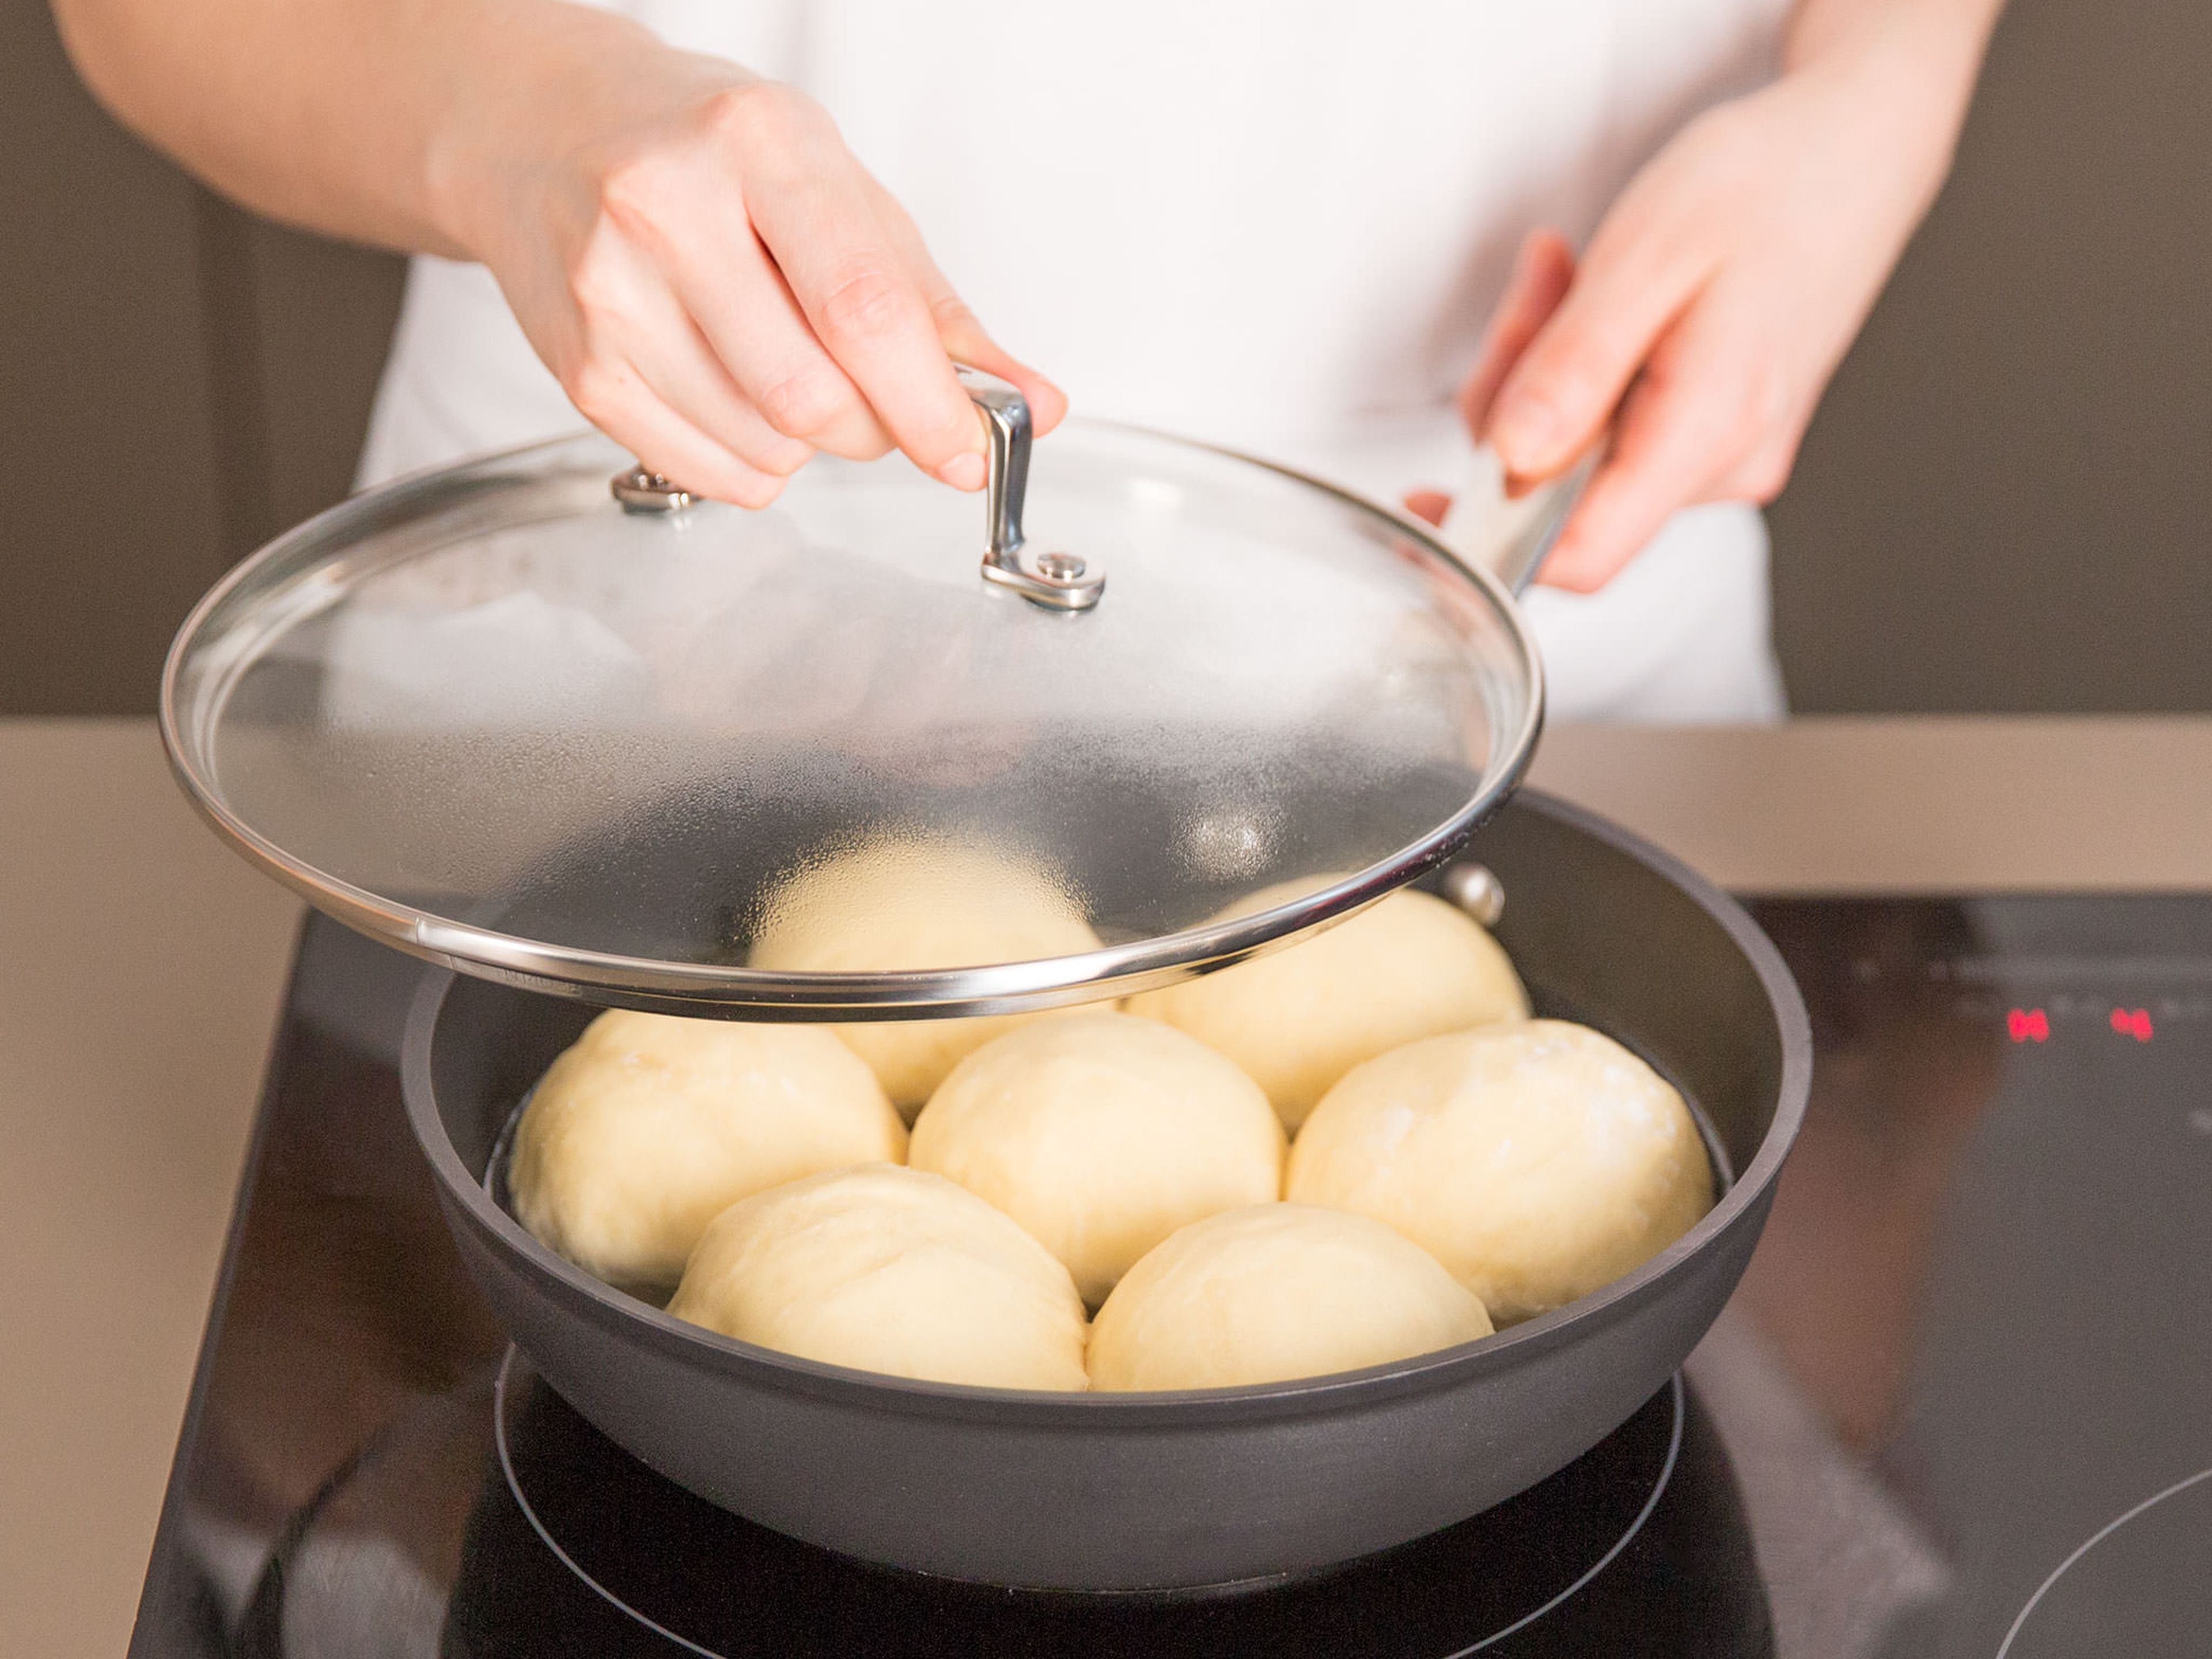 In a large frying pan, bring water, main part of salt, and oil to a low boil over medium heat. Add rolls, reduce heat to low, and cook covered for approx. 15 – 20 min. Remove from heat and transfer rolls to a serving platter and drizzle vanilla sauce on top. Enjoy!